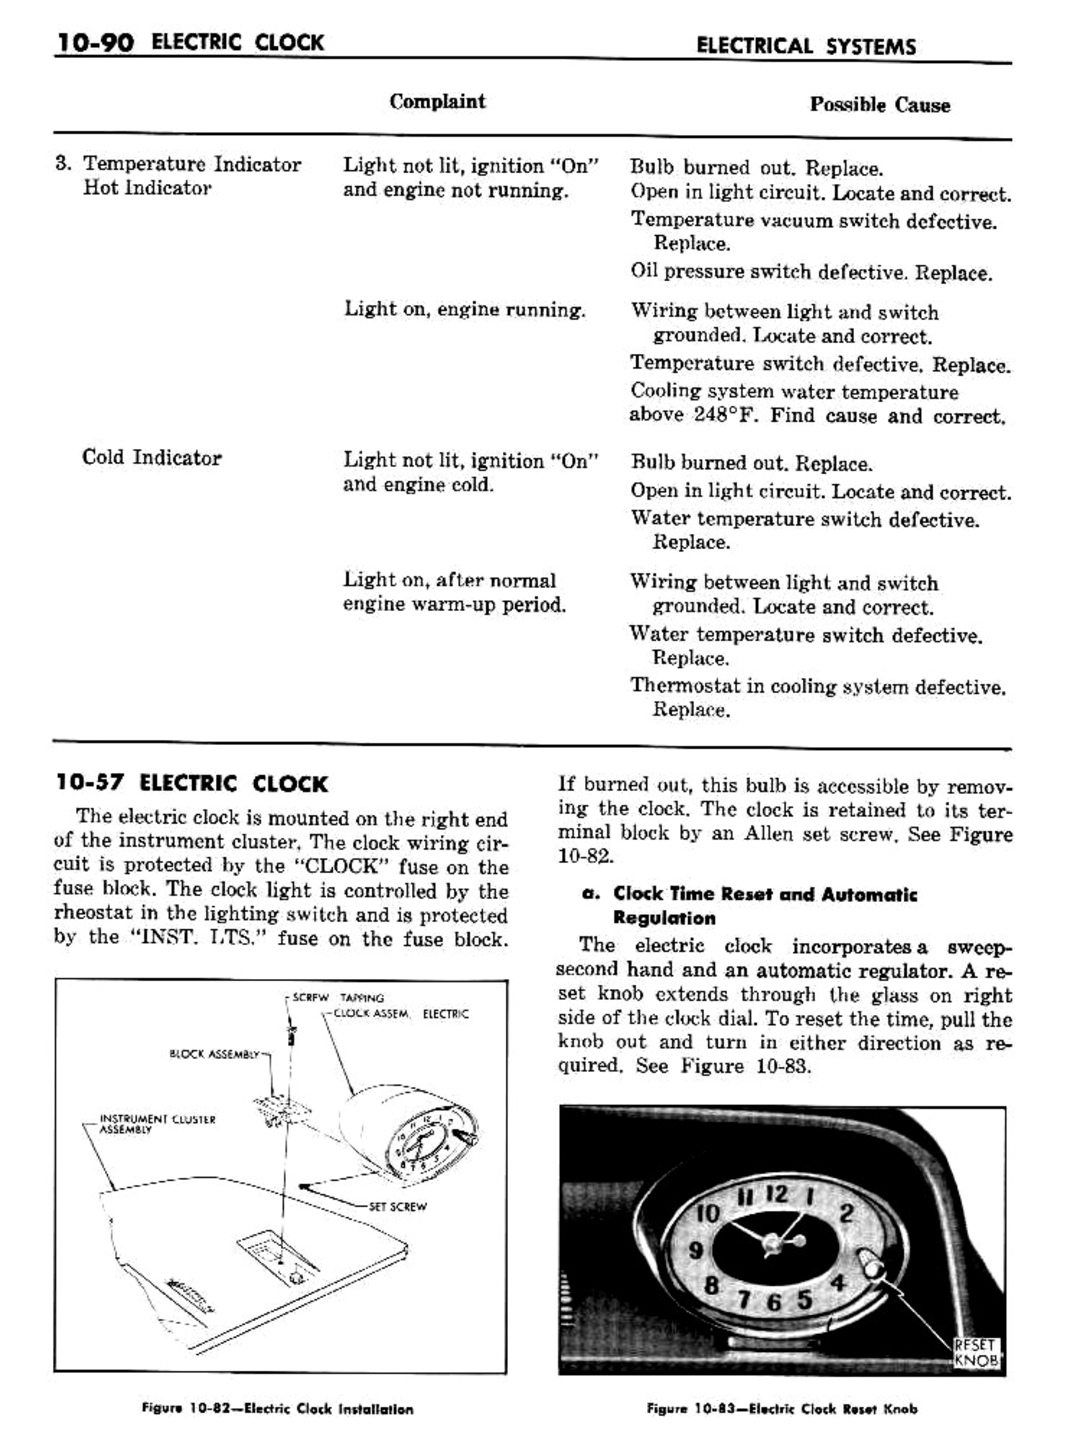 n_11 1960 Buick Shop Manual - Electrical Systems-090-090.jpg